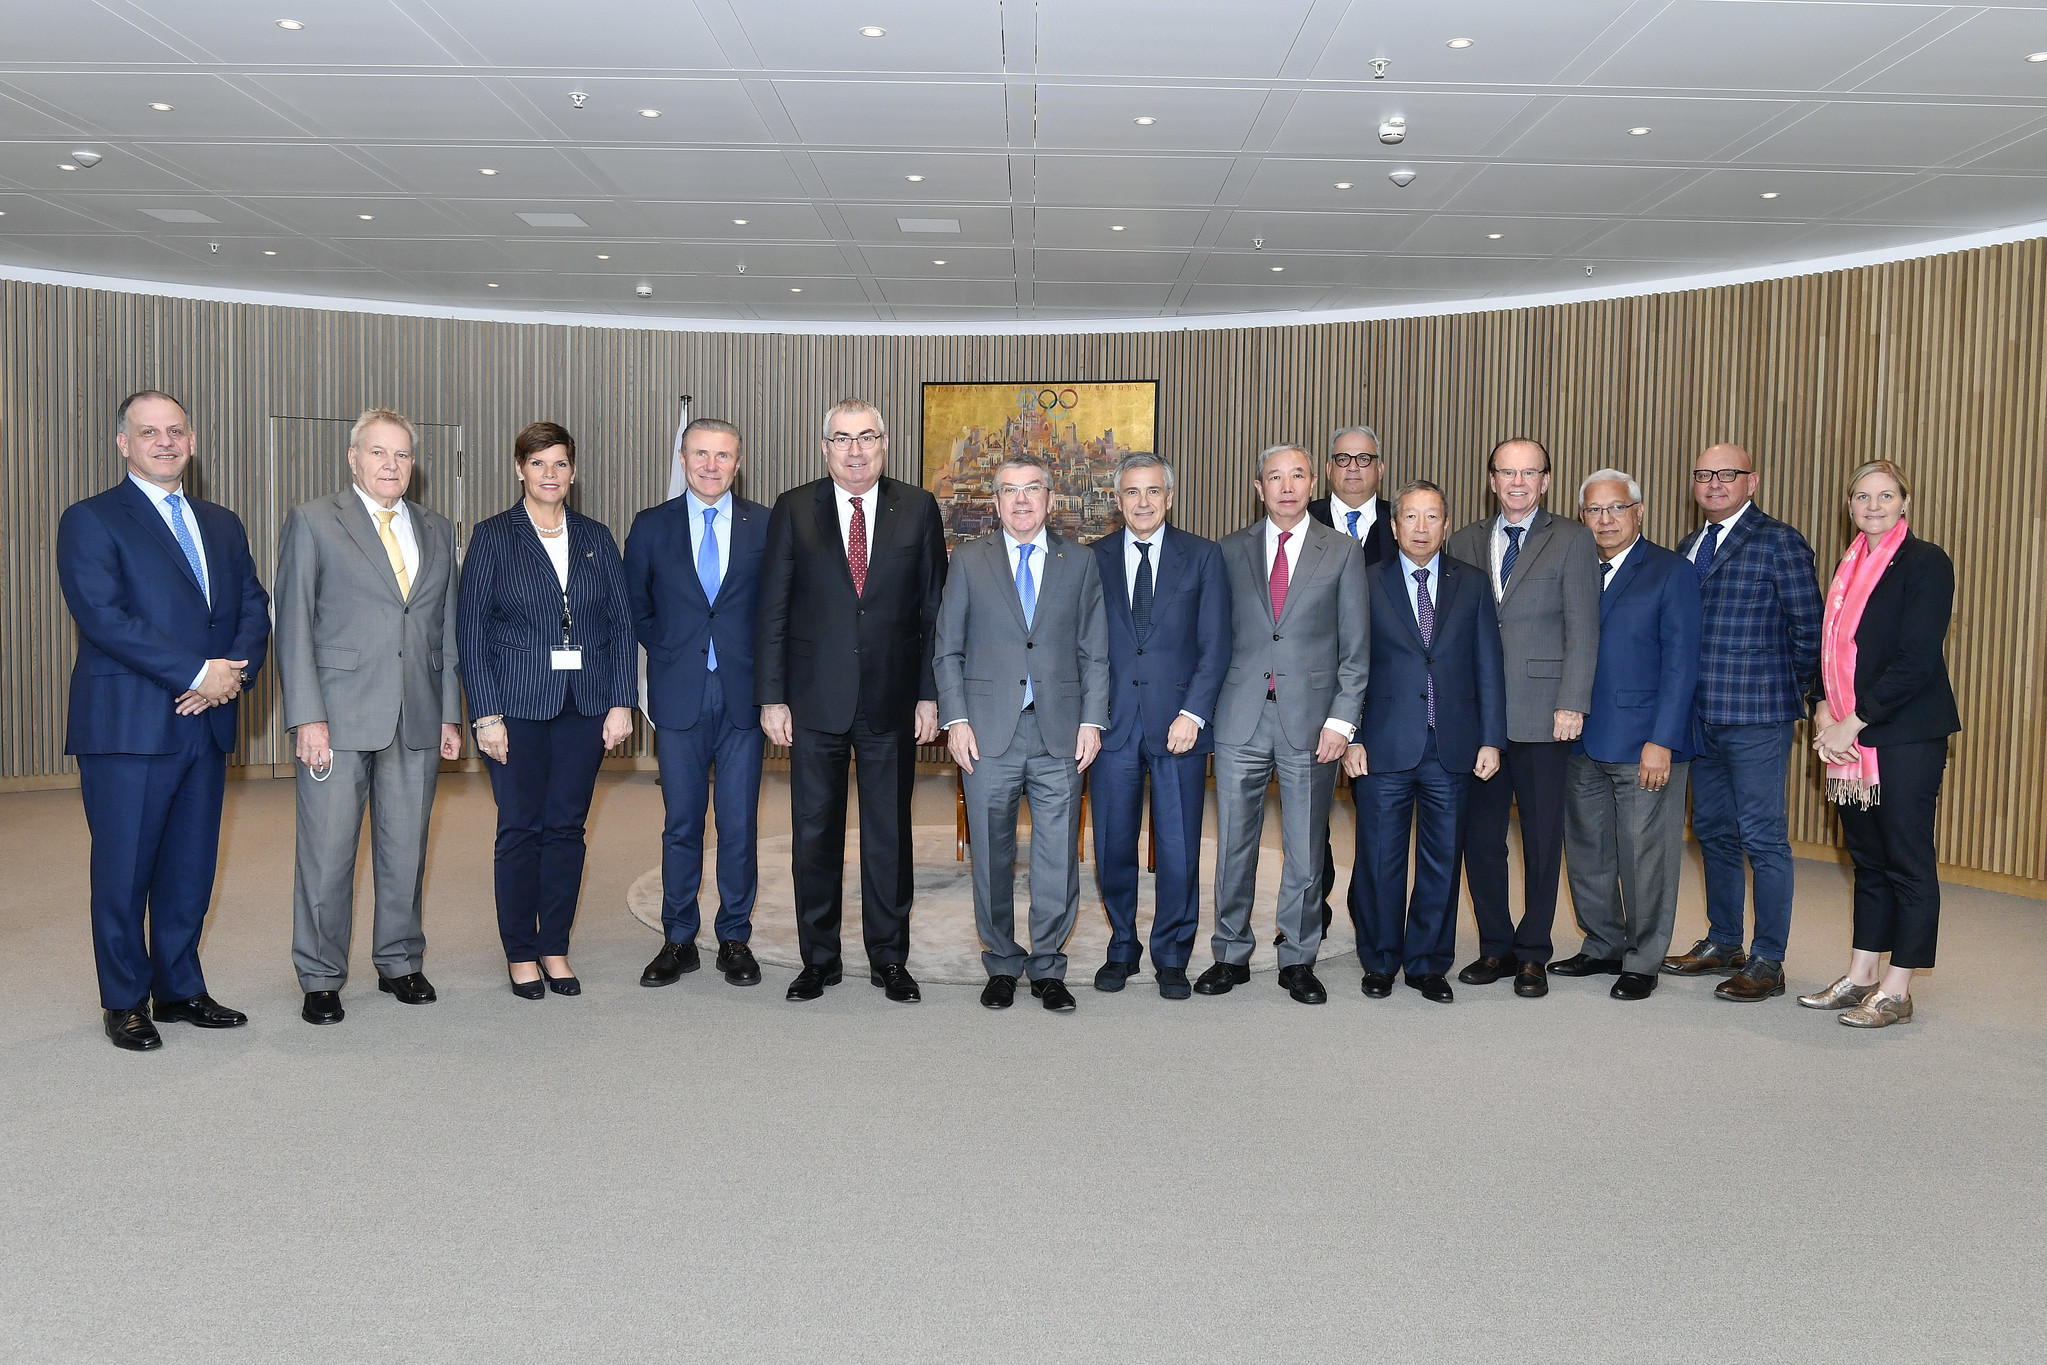 The IOC Executive Board will hold its latest meeting in Lausanne this week ©IOC